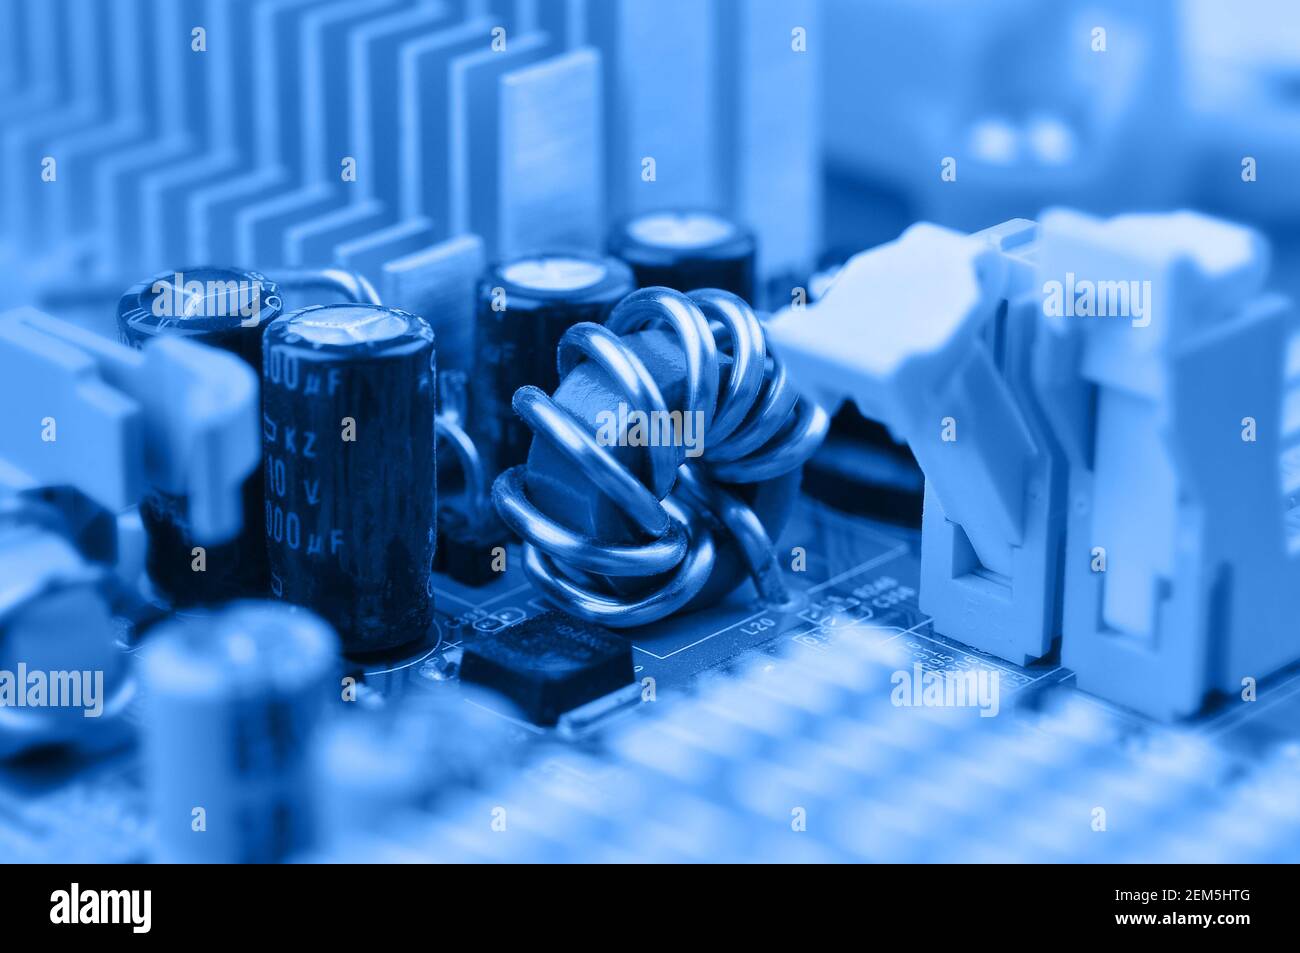 Closeup of electronic circuit board with inductor coil and capacitor. Stock Photo